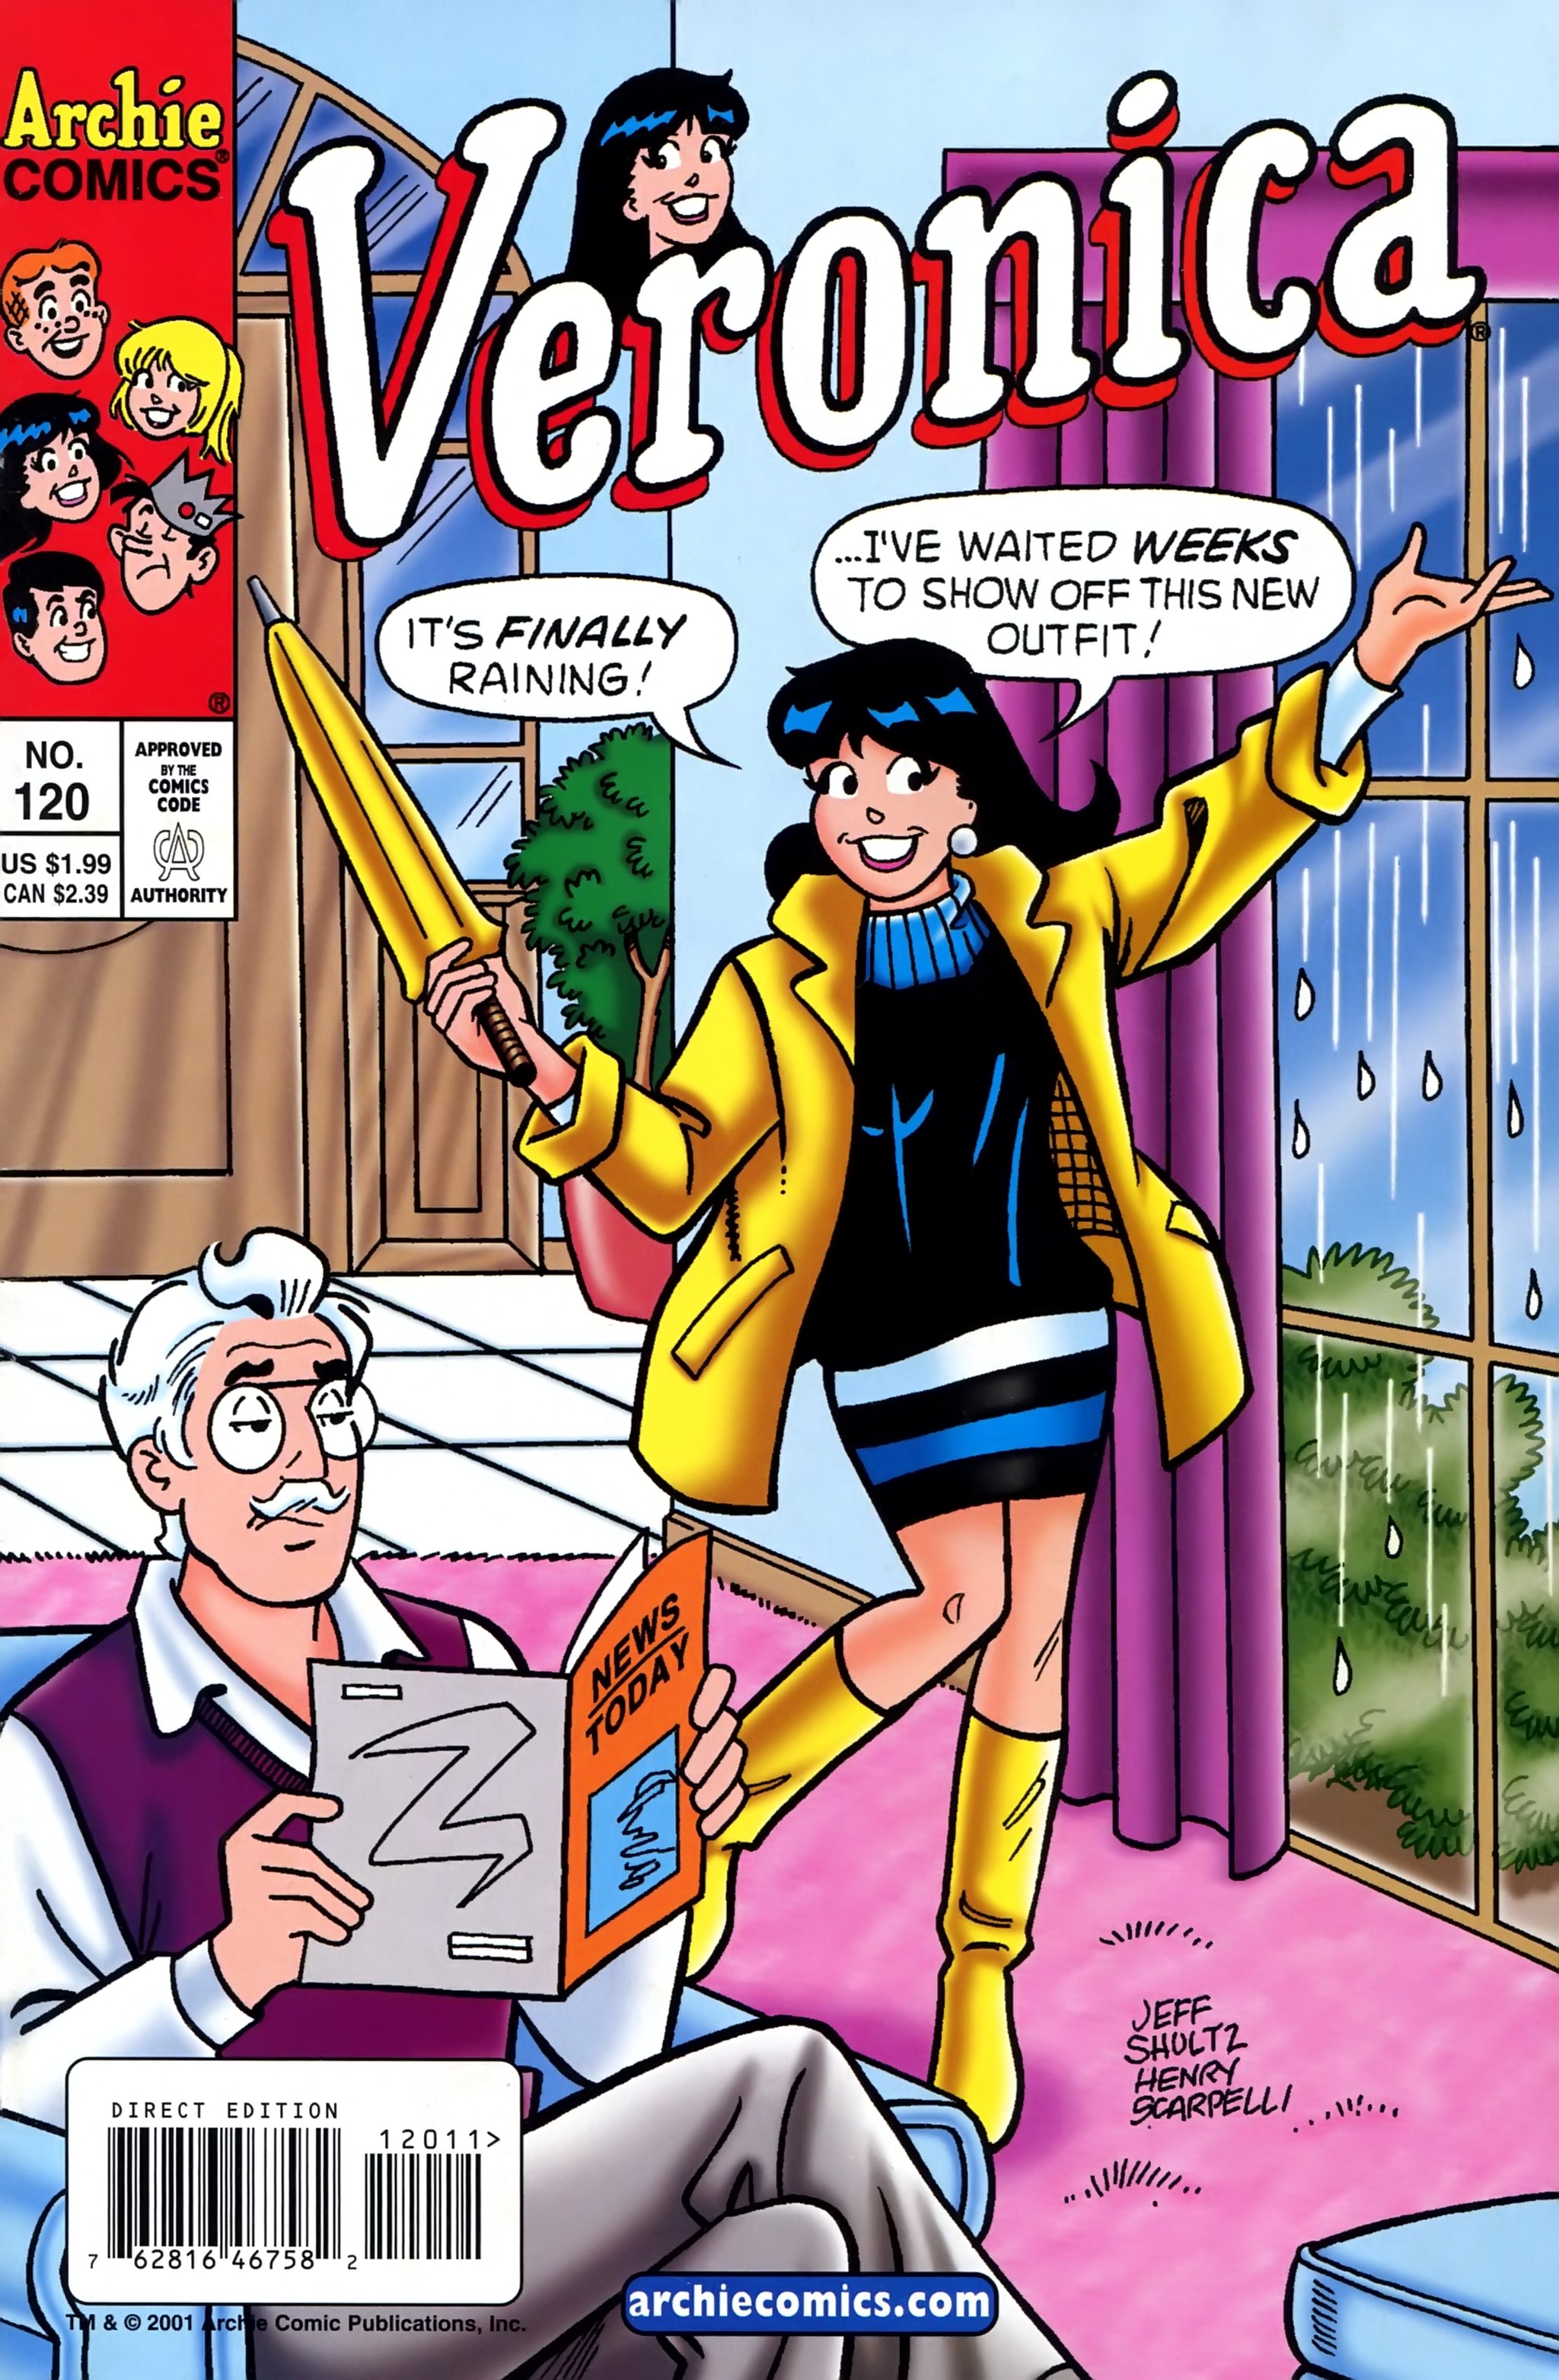 Read online Veronica comic -  Issue #120 - 1